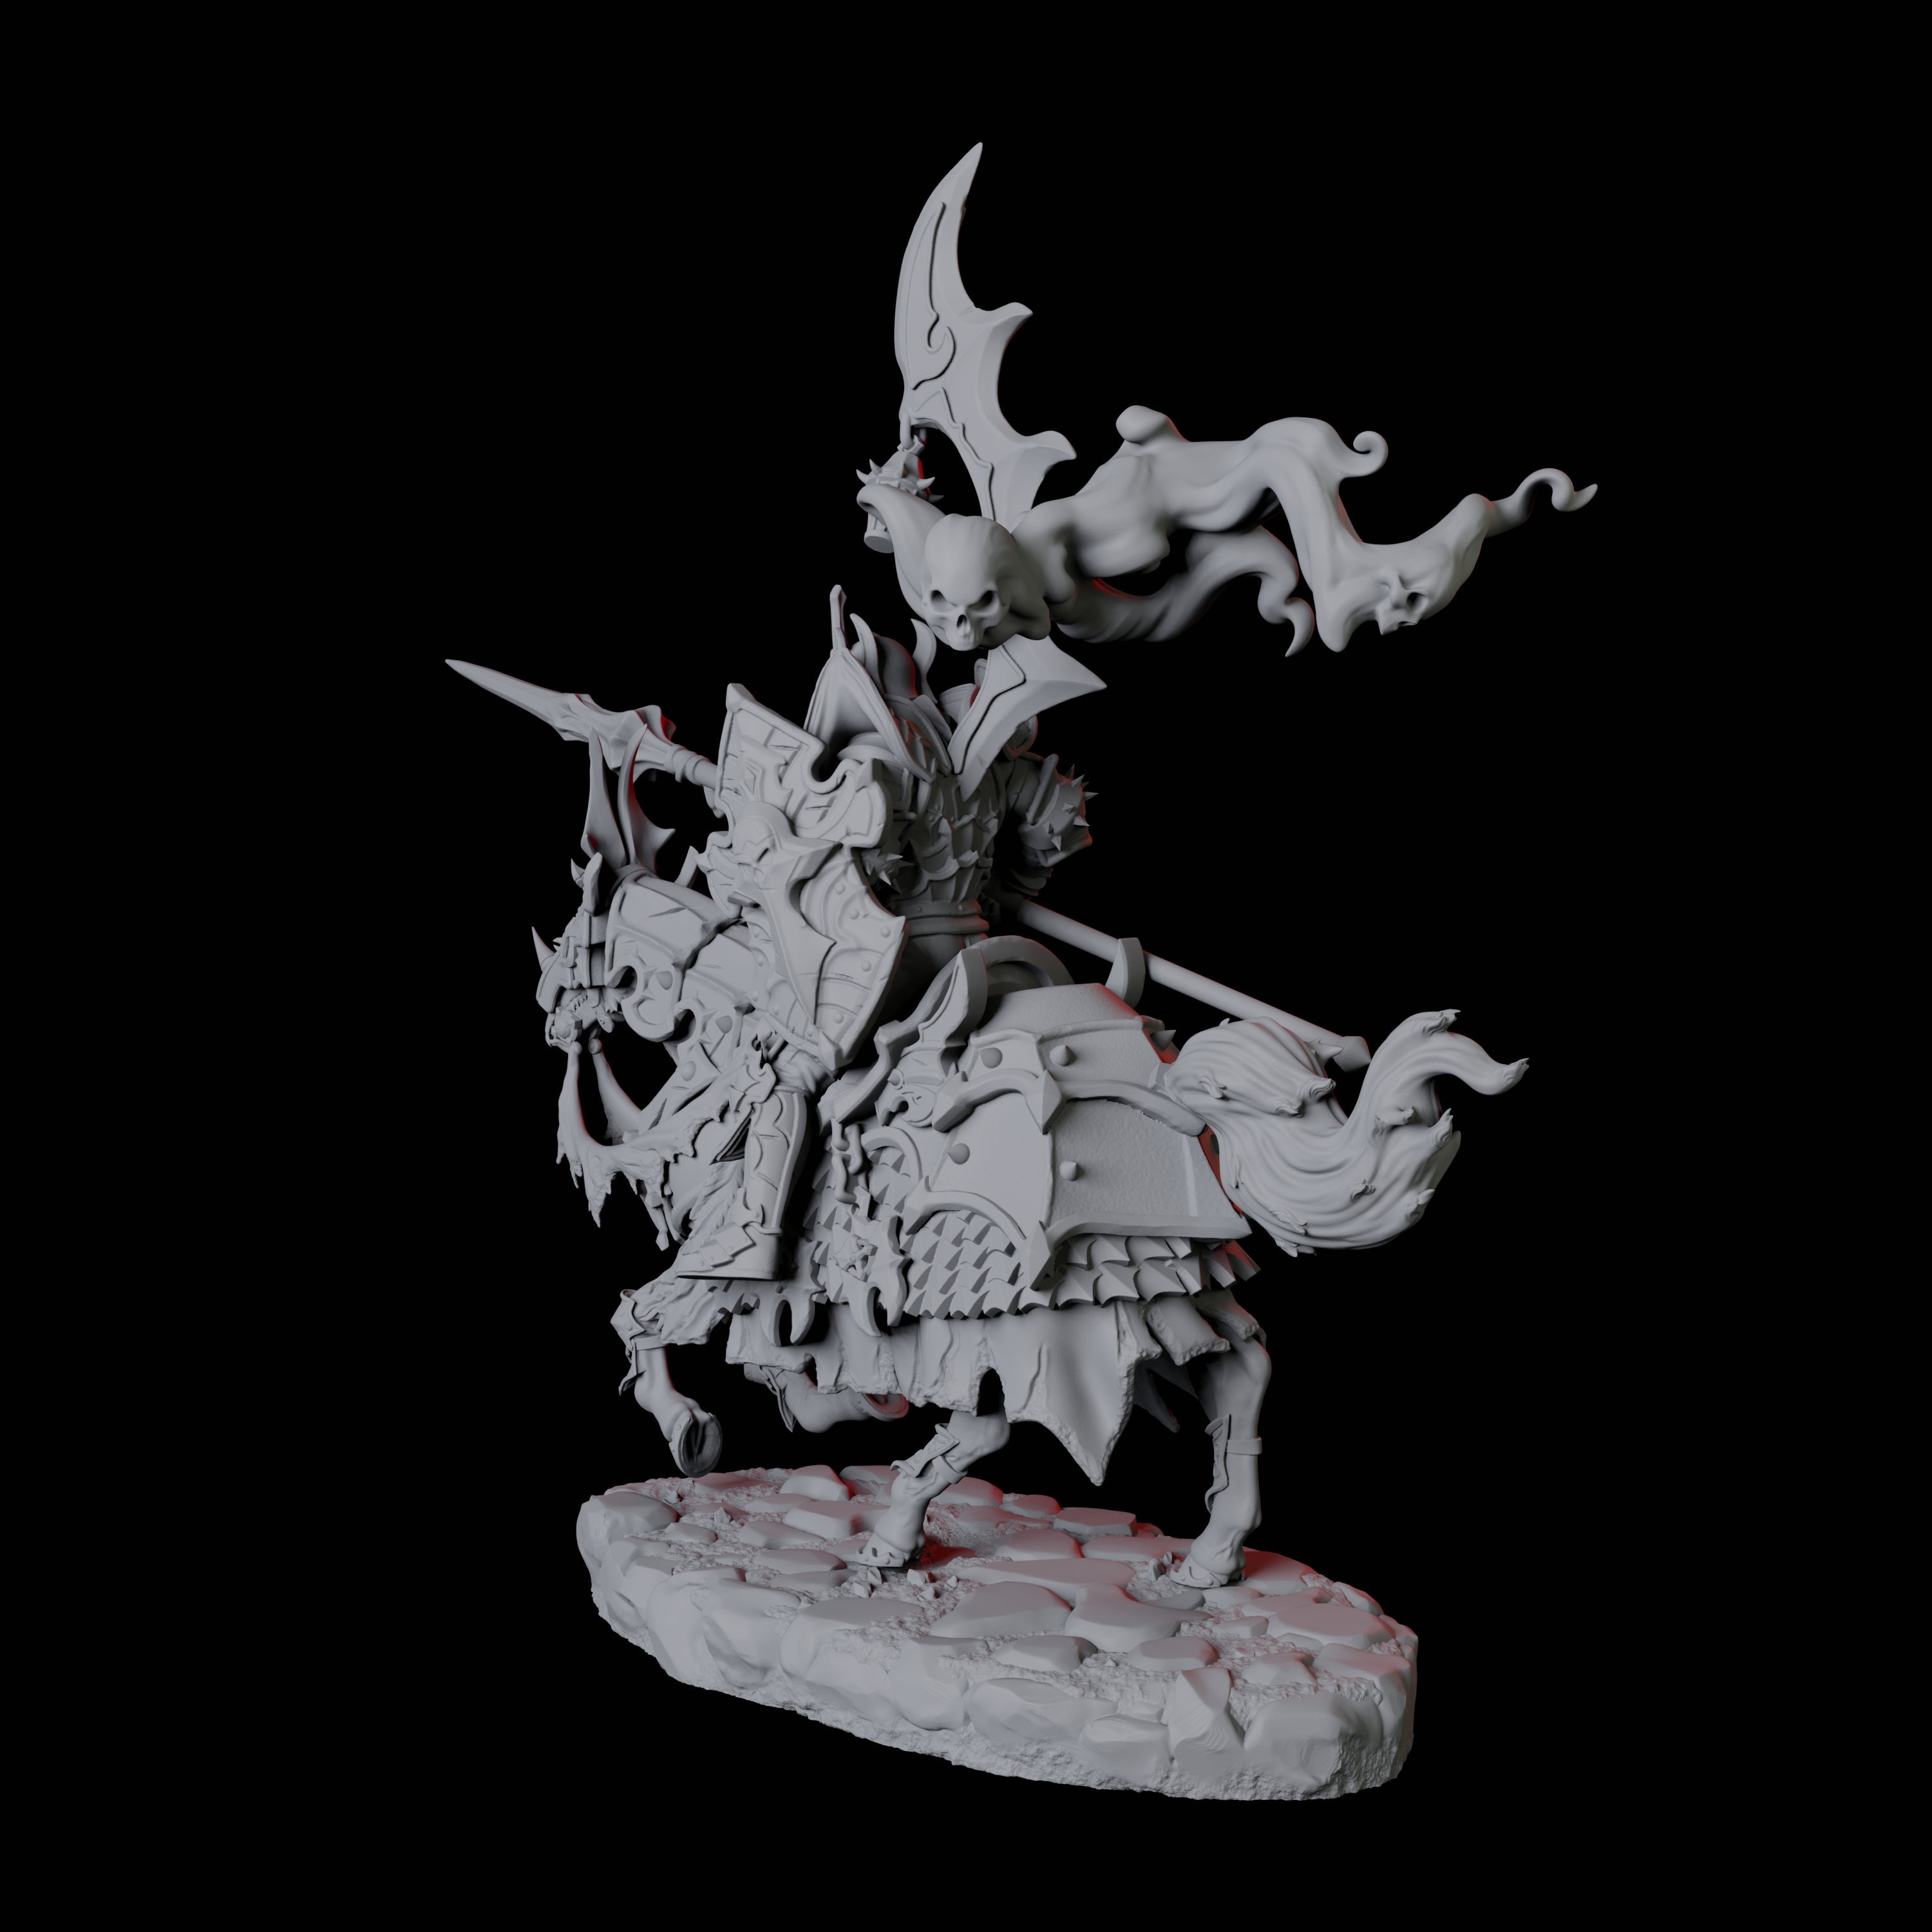 Stalking Mounted Revenant A Miniature for Dungeons and Dragons, Pathfinder or other TTRPGs